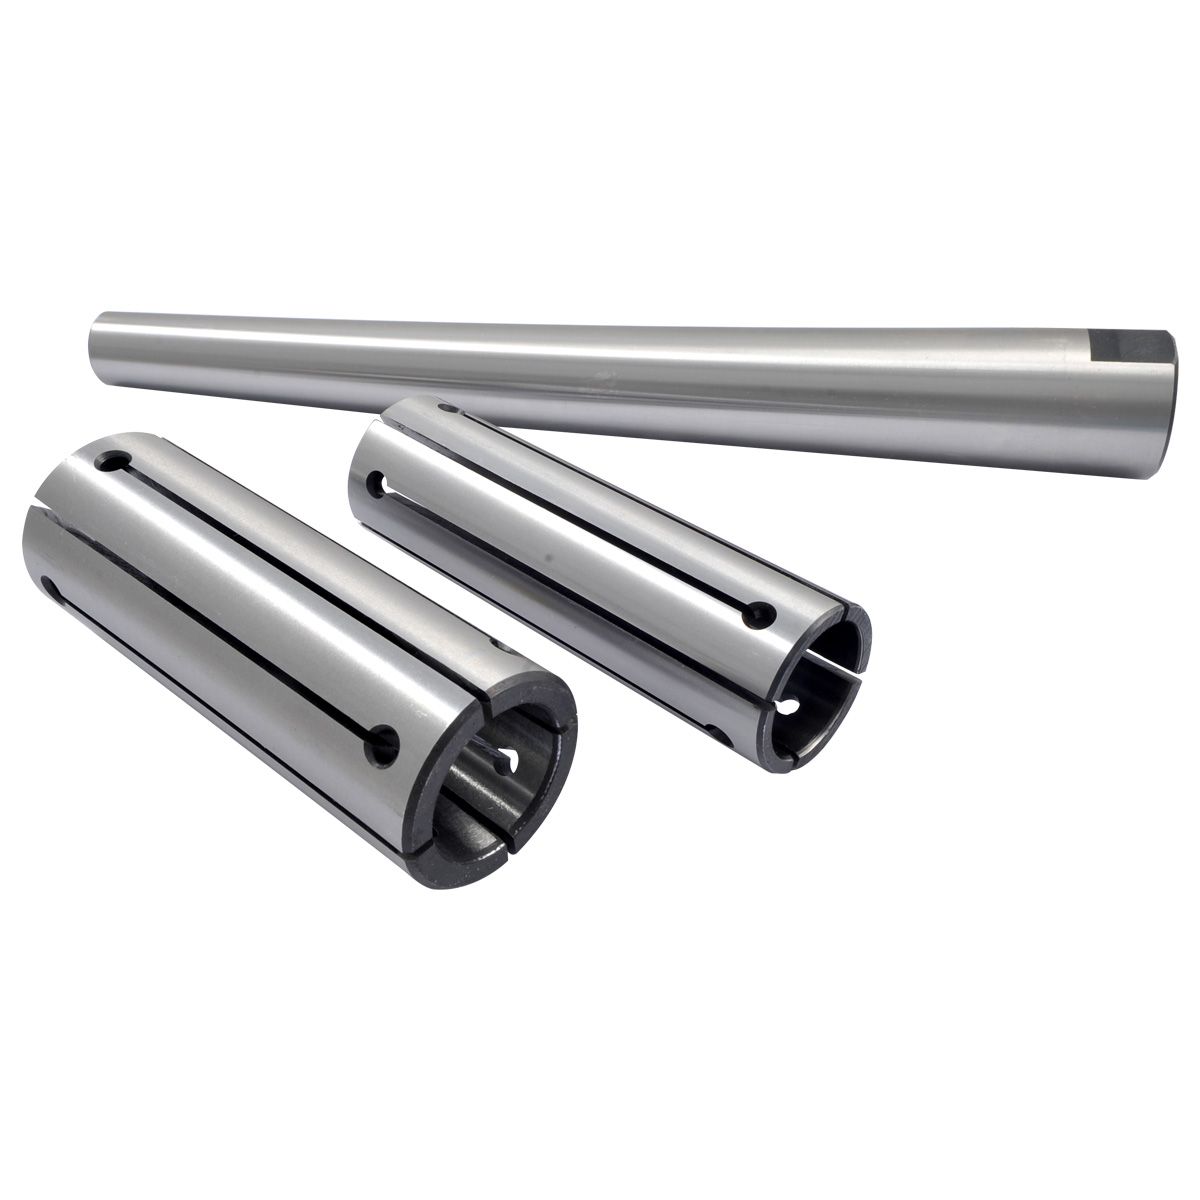 1-1/4-1-1/2 X 9" WITH 4" SLEEVE EXPANDING MANDREL 3 PIECE KIT (3902-3062)